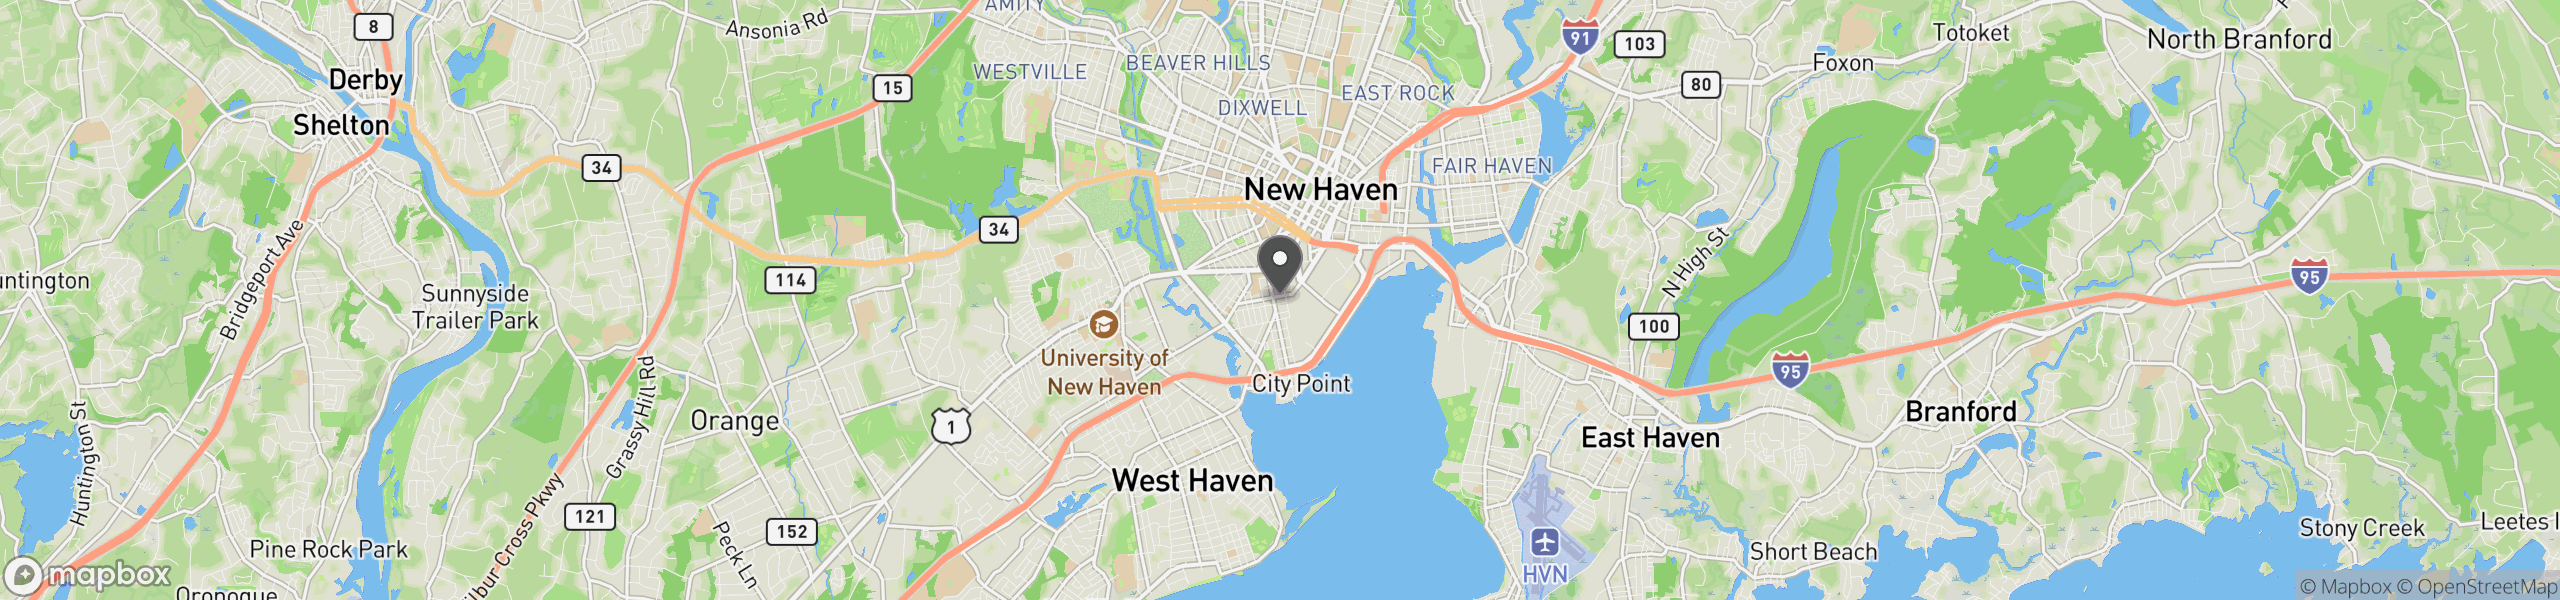 New Haven, CT 06519